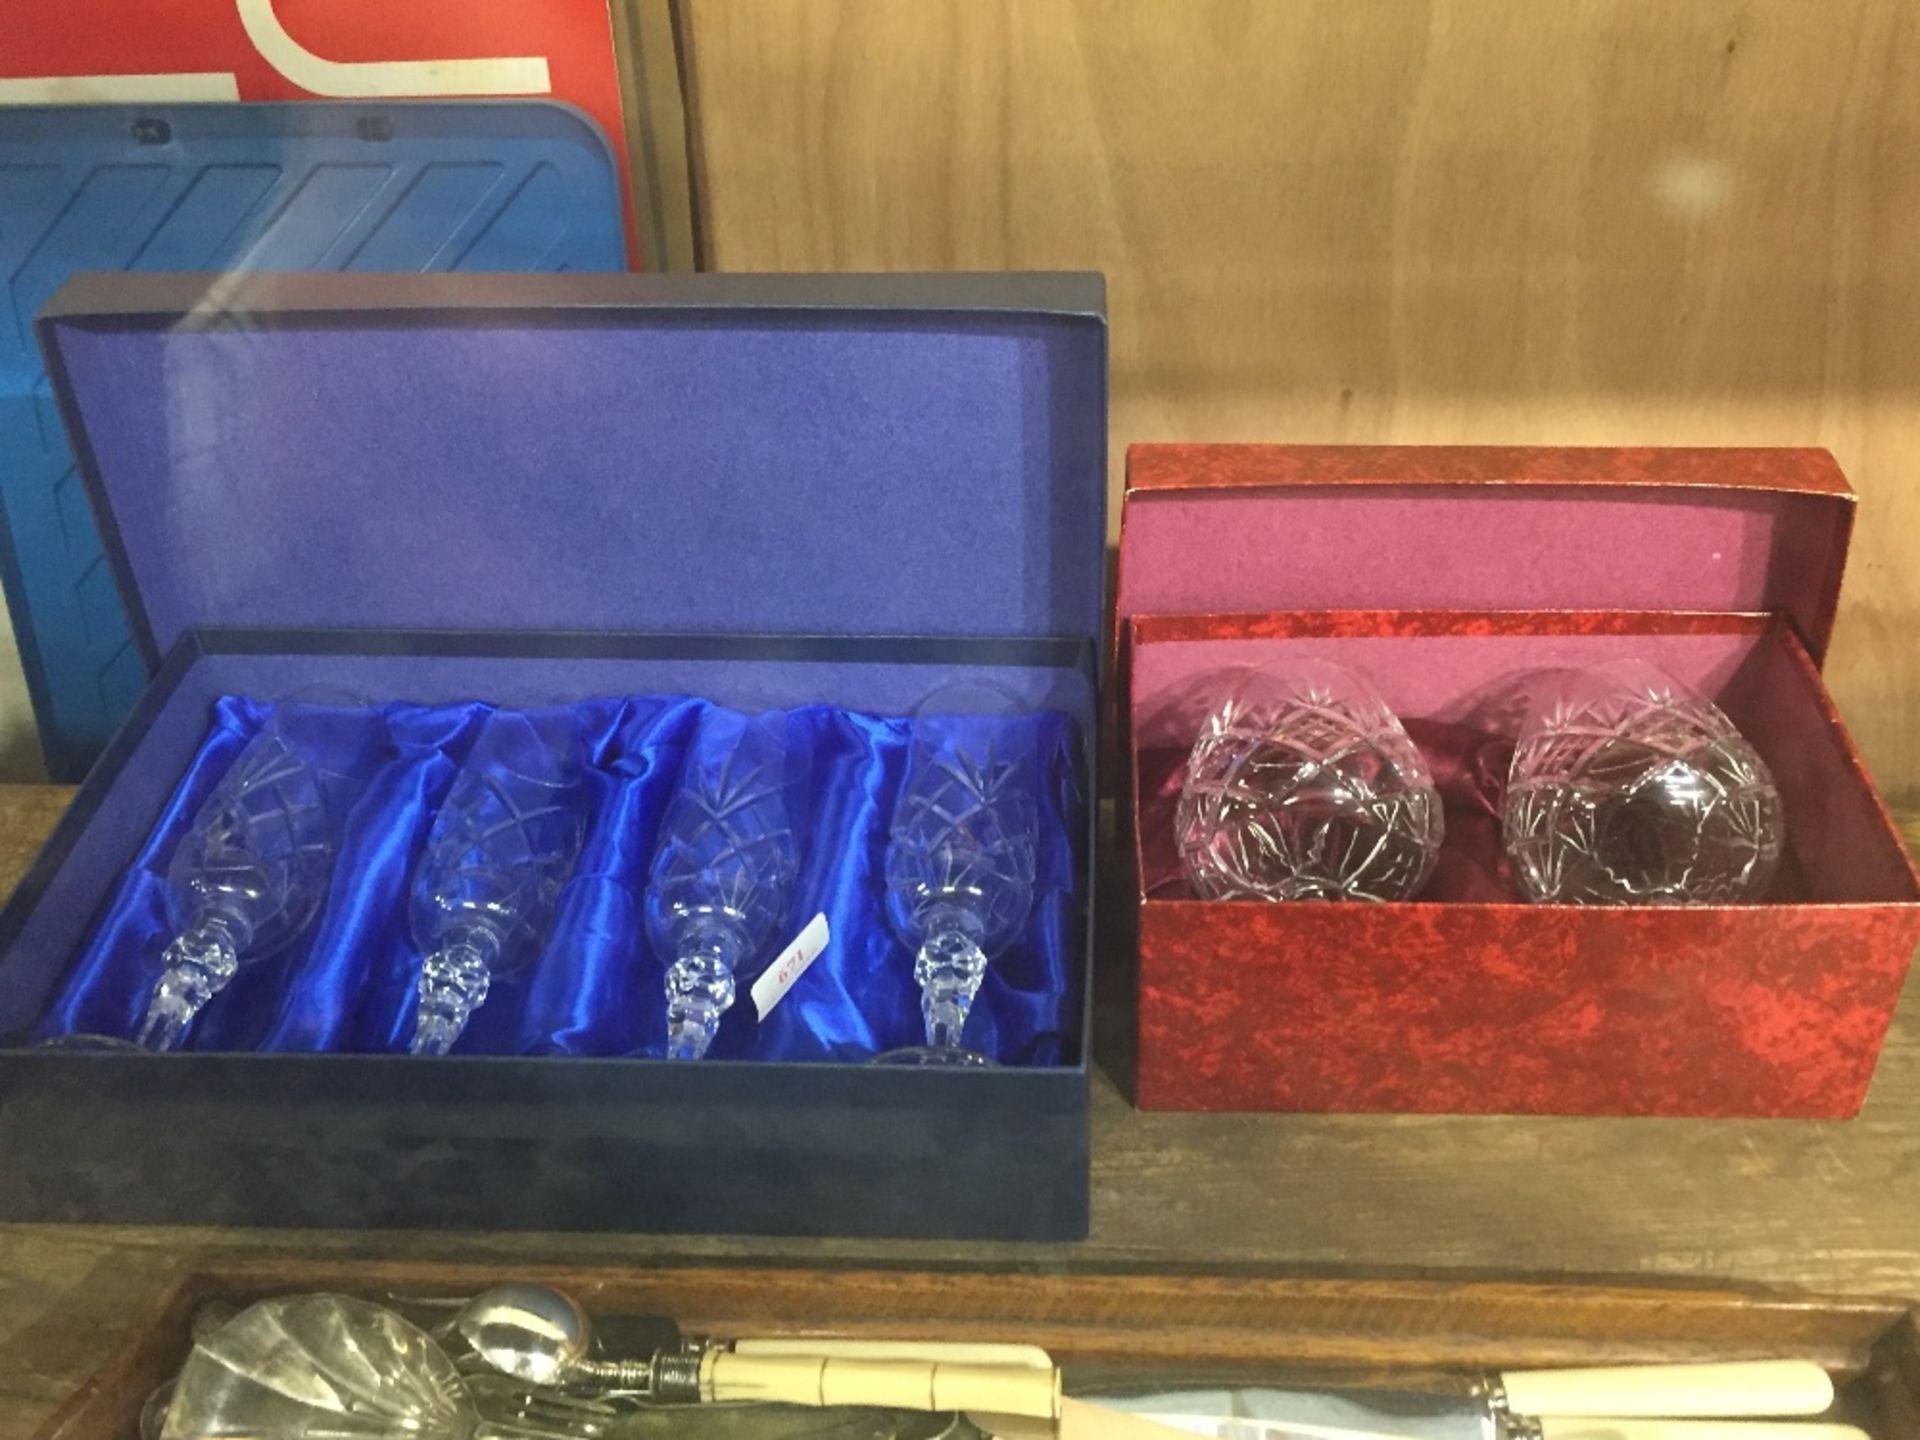 BOX INC PAIR OF DOULTON INTERNATIONAL GLASSES AND BOXED SET OF 4 BOHEMIEN CRYSTAL GLASS